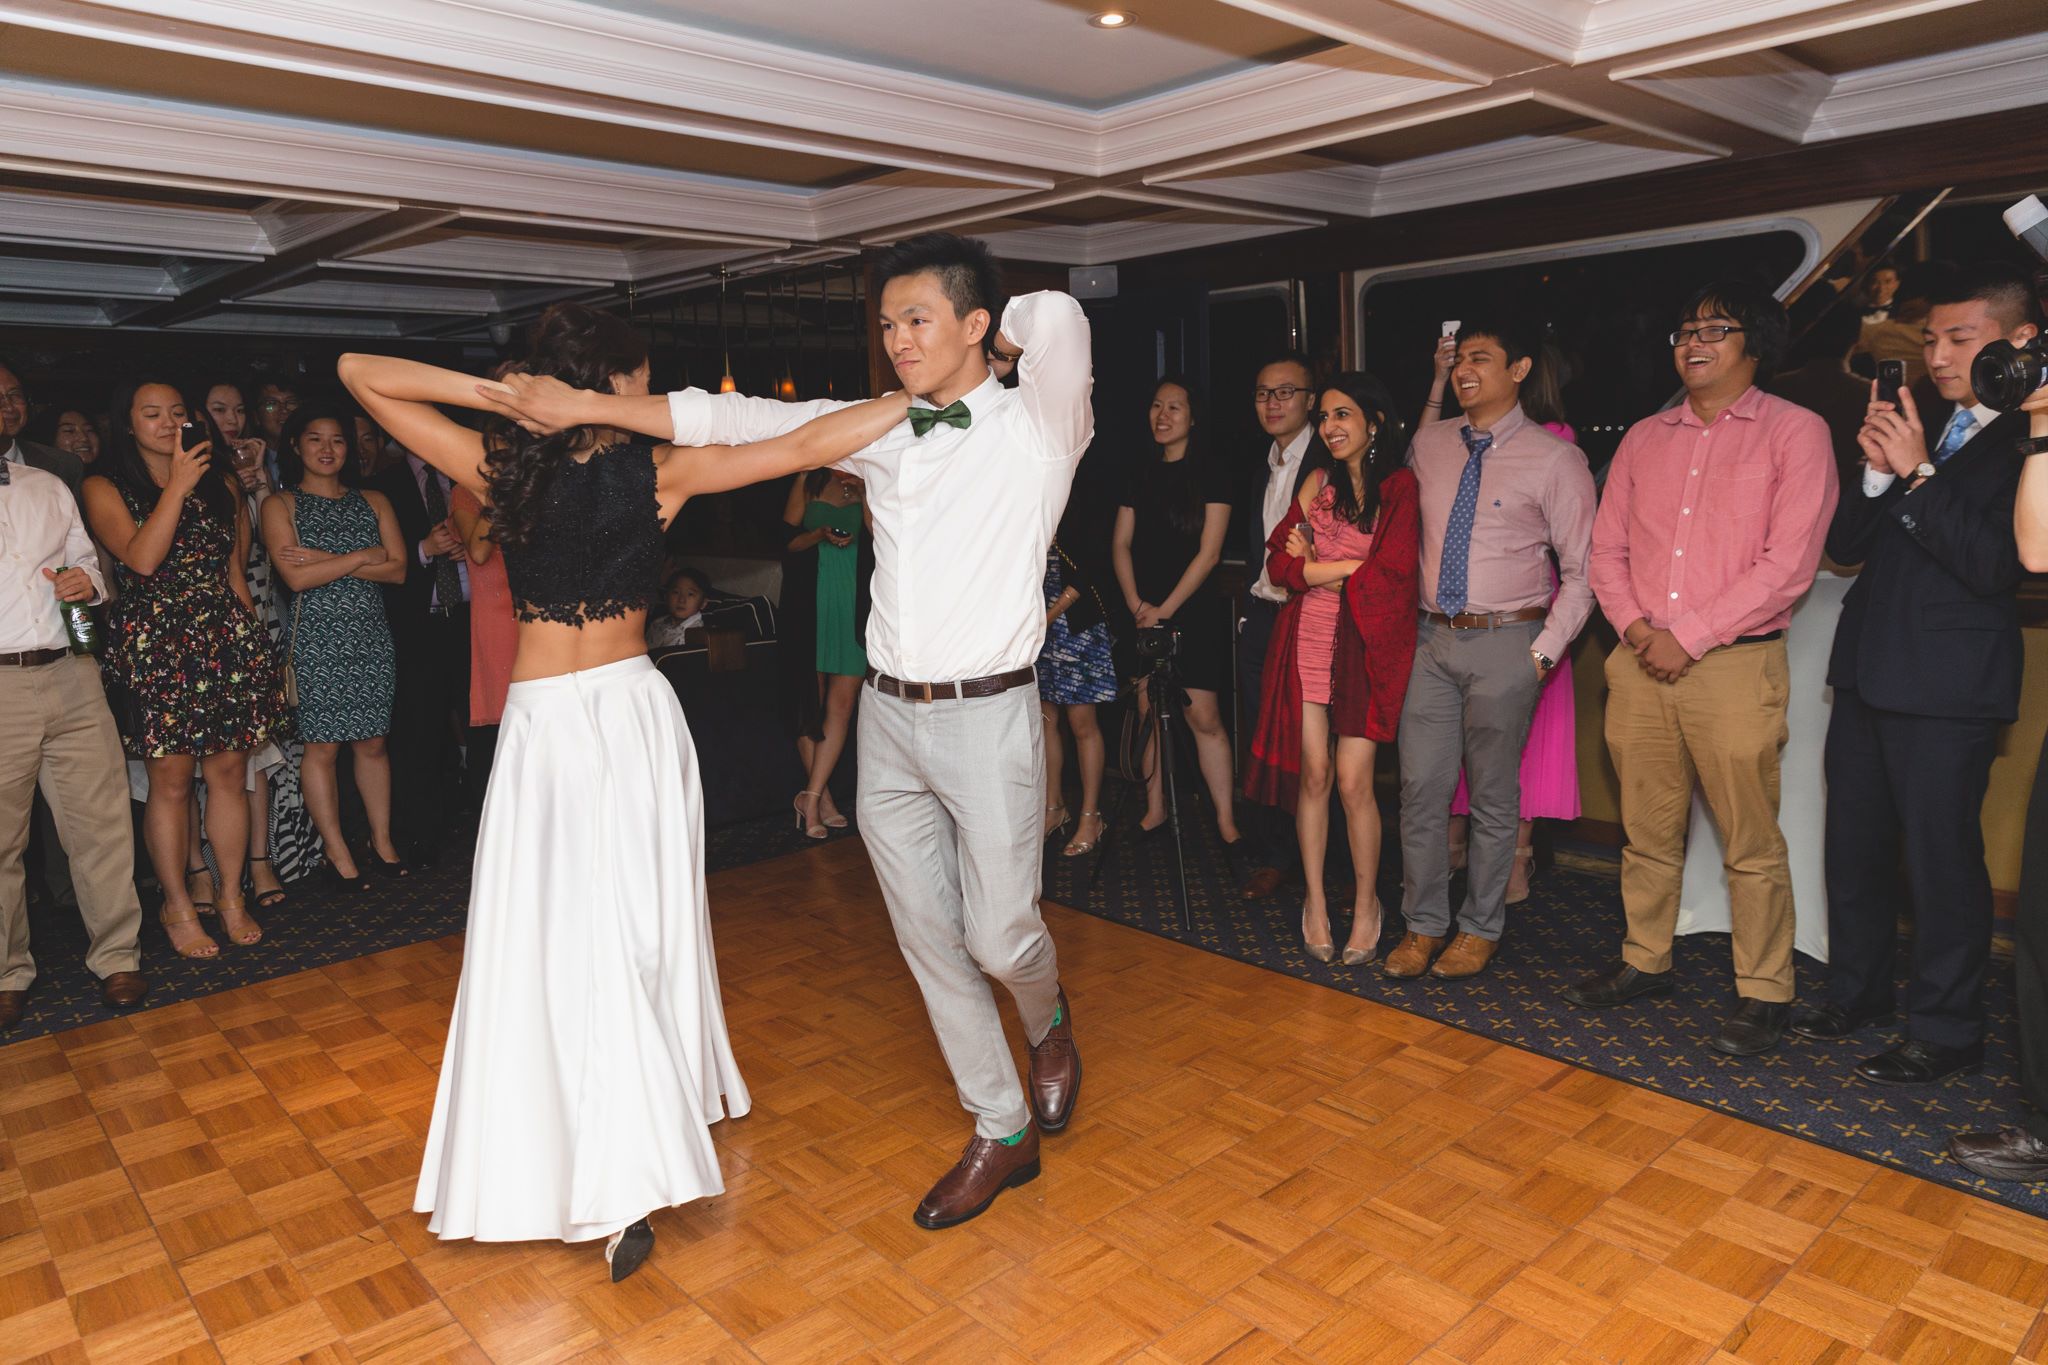 5 Reasons People Dance at Weddings and Social Events